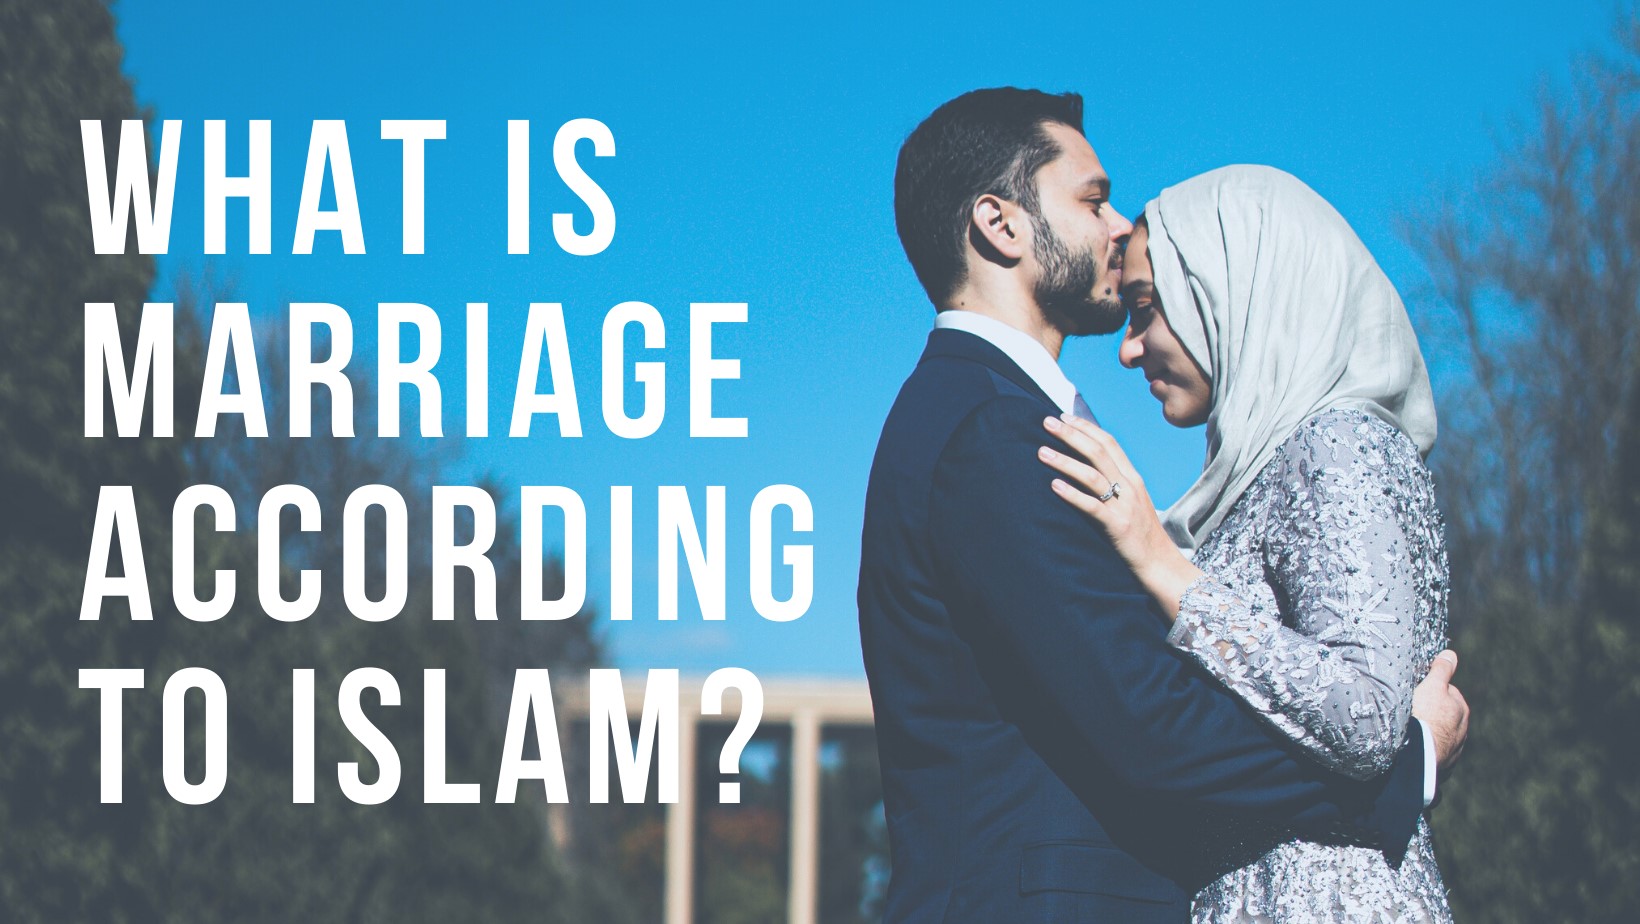 What is marriage according to Islam?